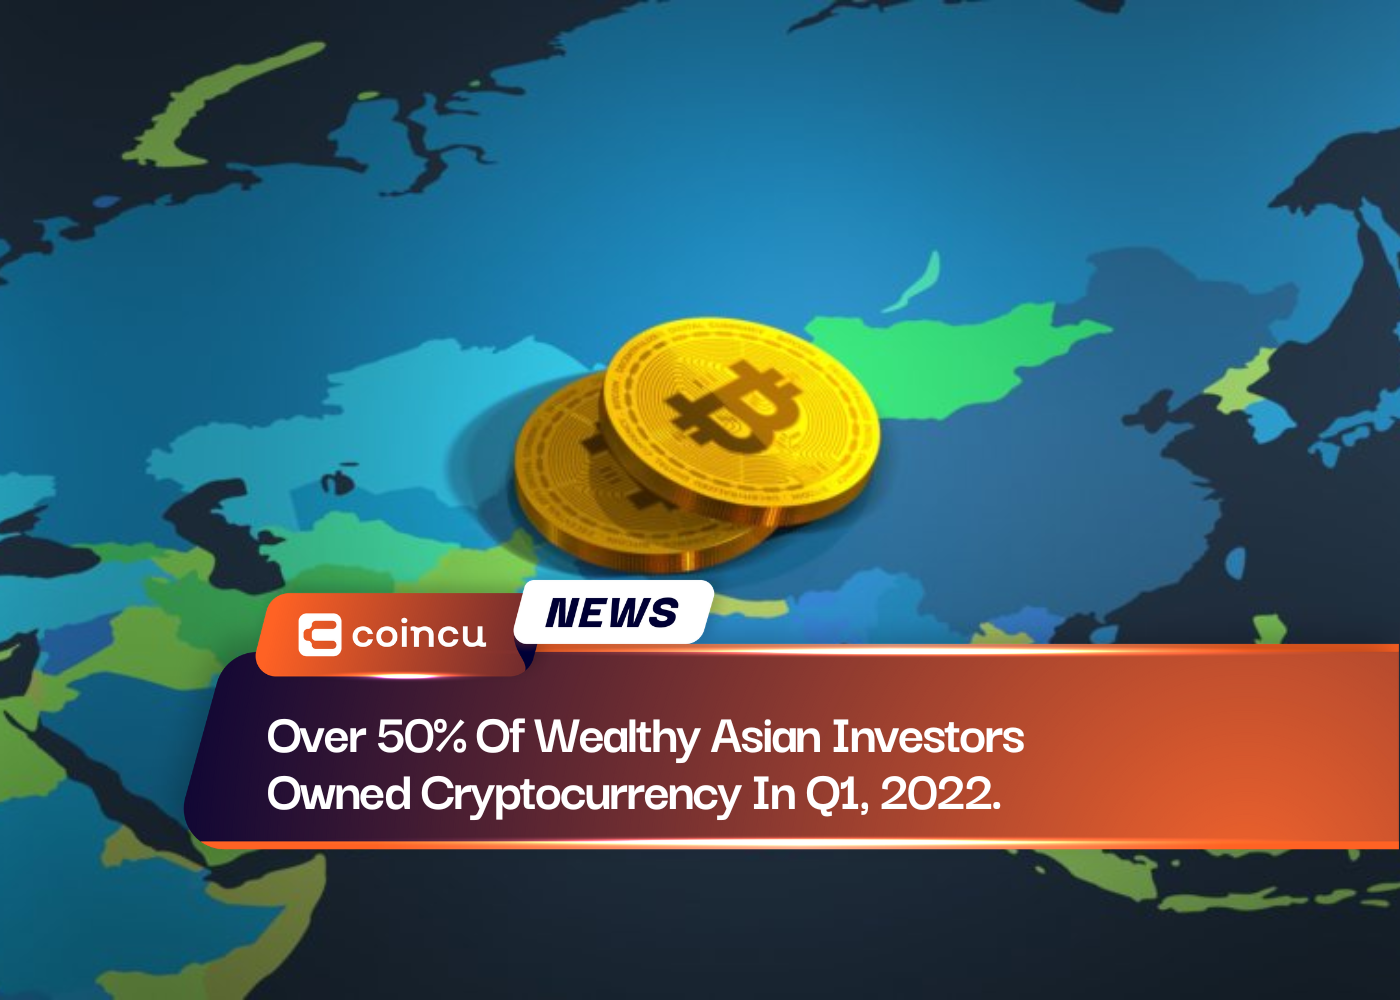 Over 50% Of Wealthy Asian Investors Owned Cryptocurrency In Q1, 2022.